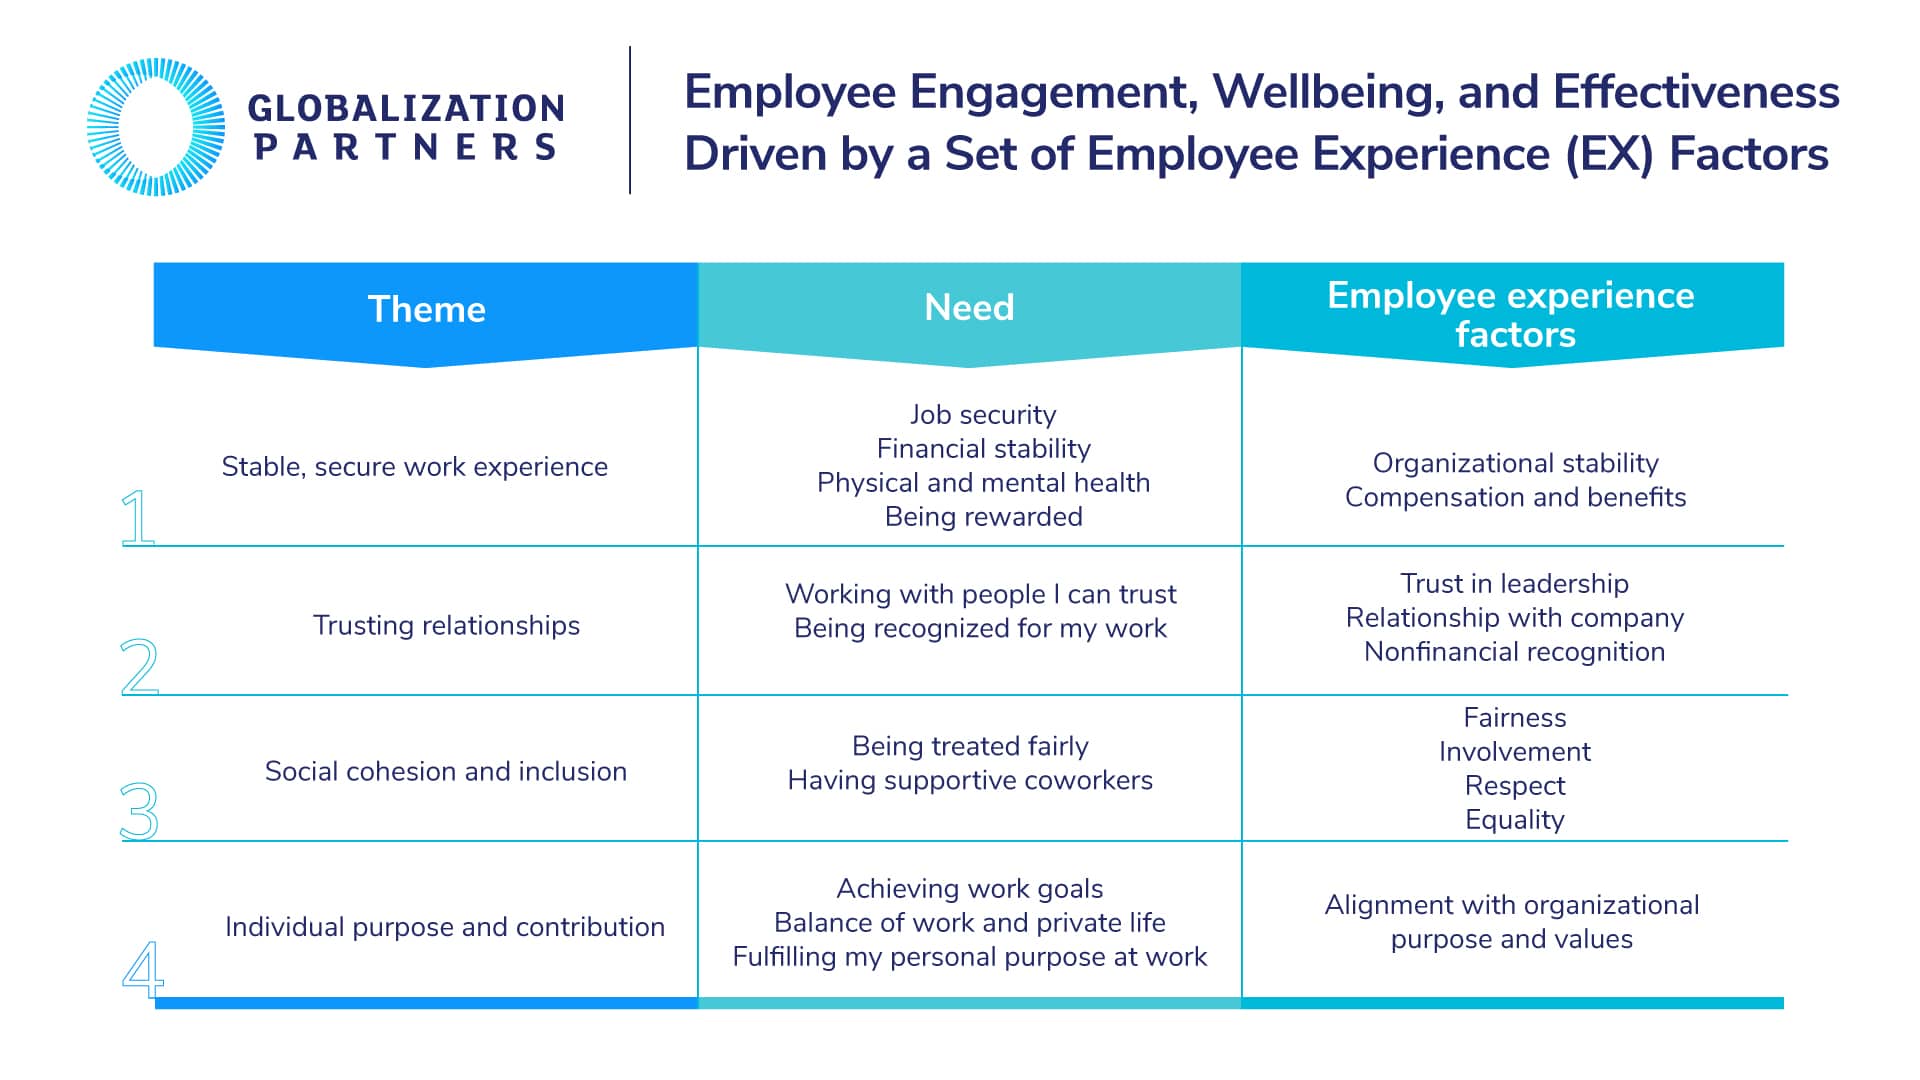 Graphic of Employee Engagement, Wellbeing, and Effectiveness Driven by a Set of Employee Experience (EX) Factors